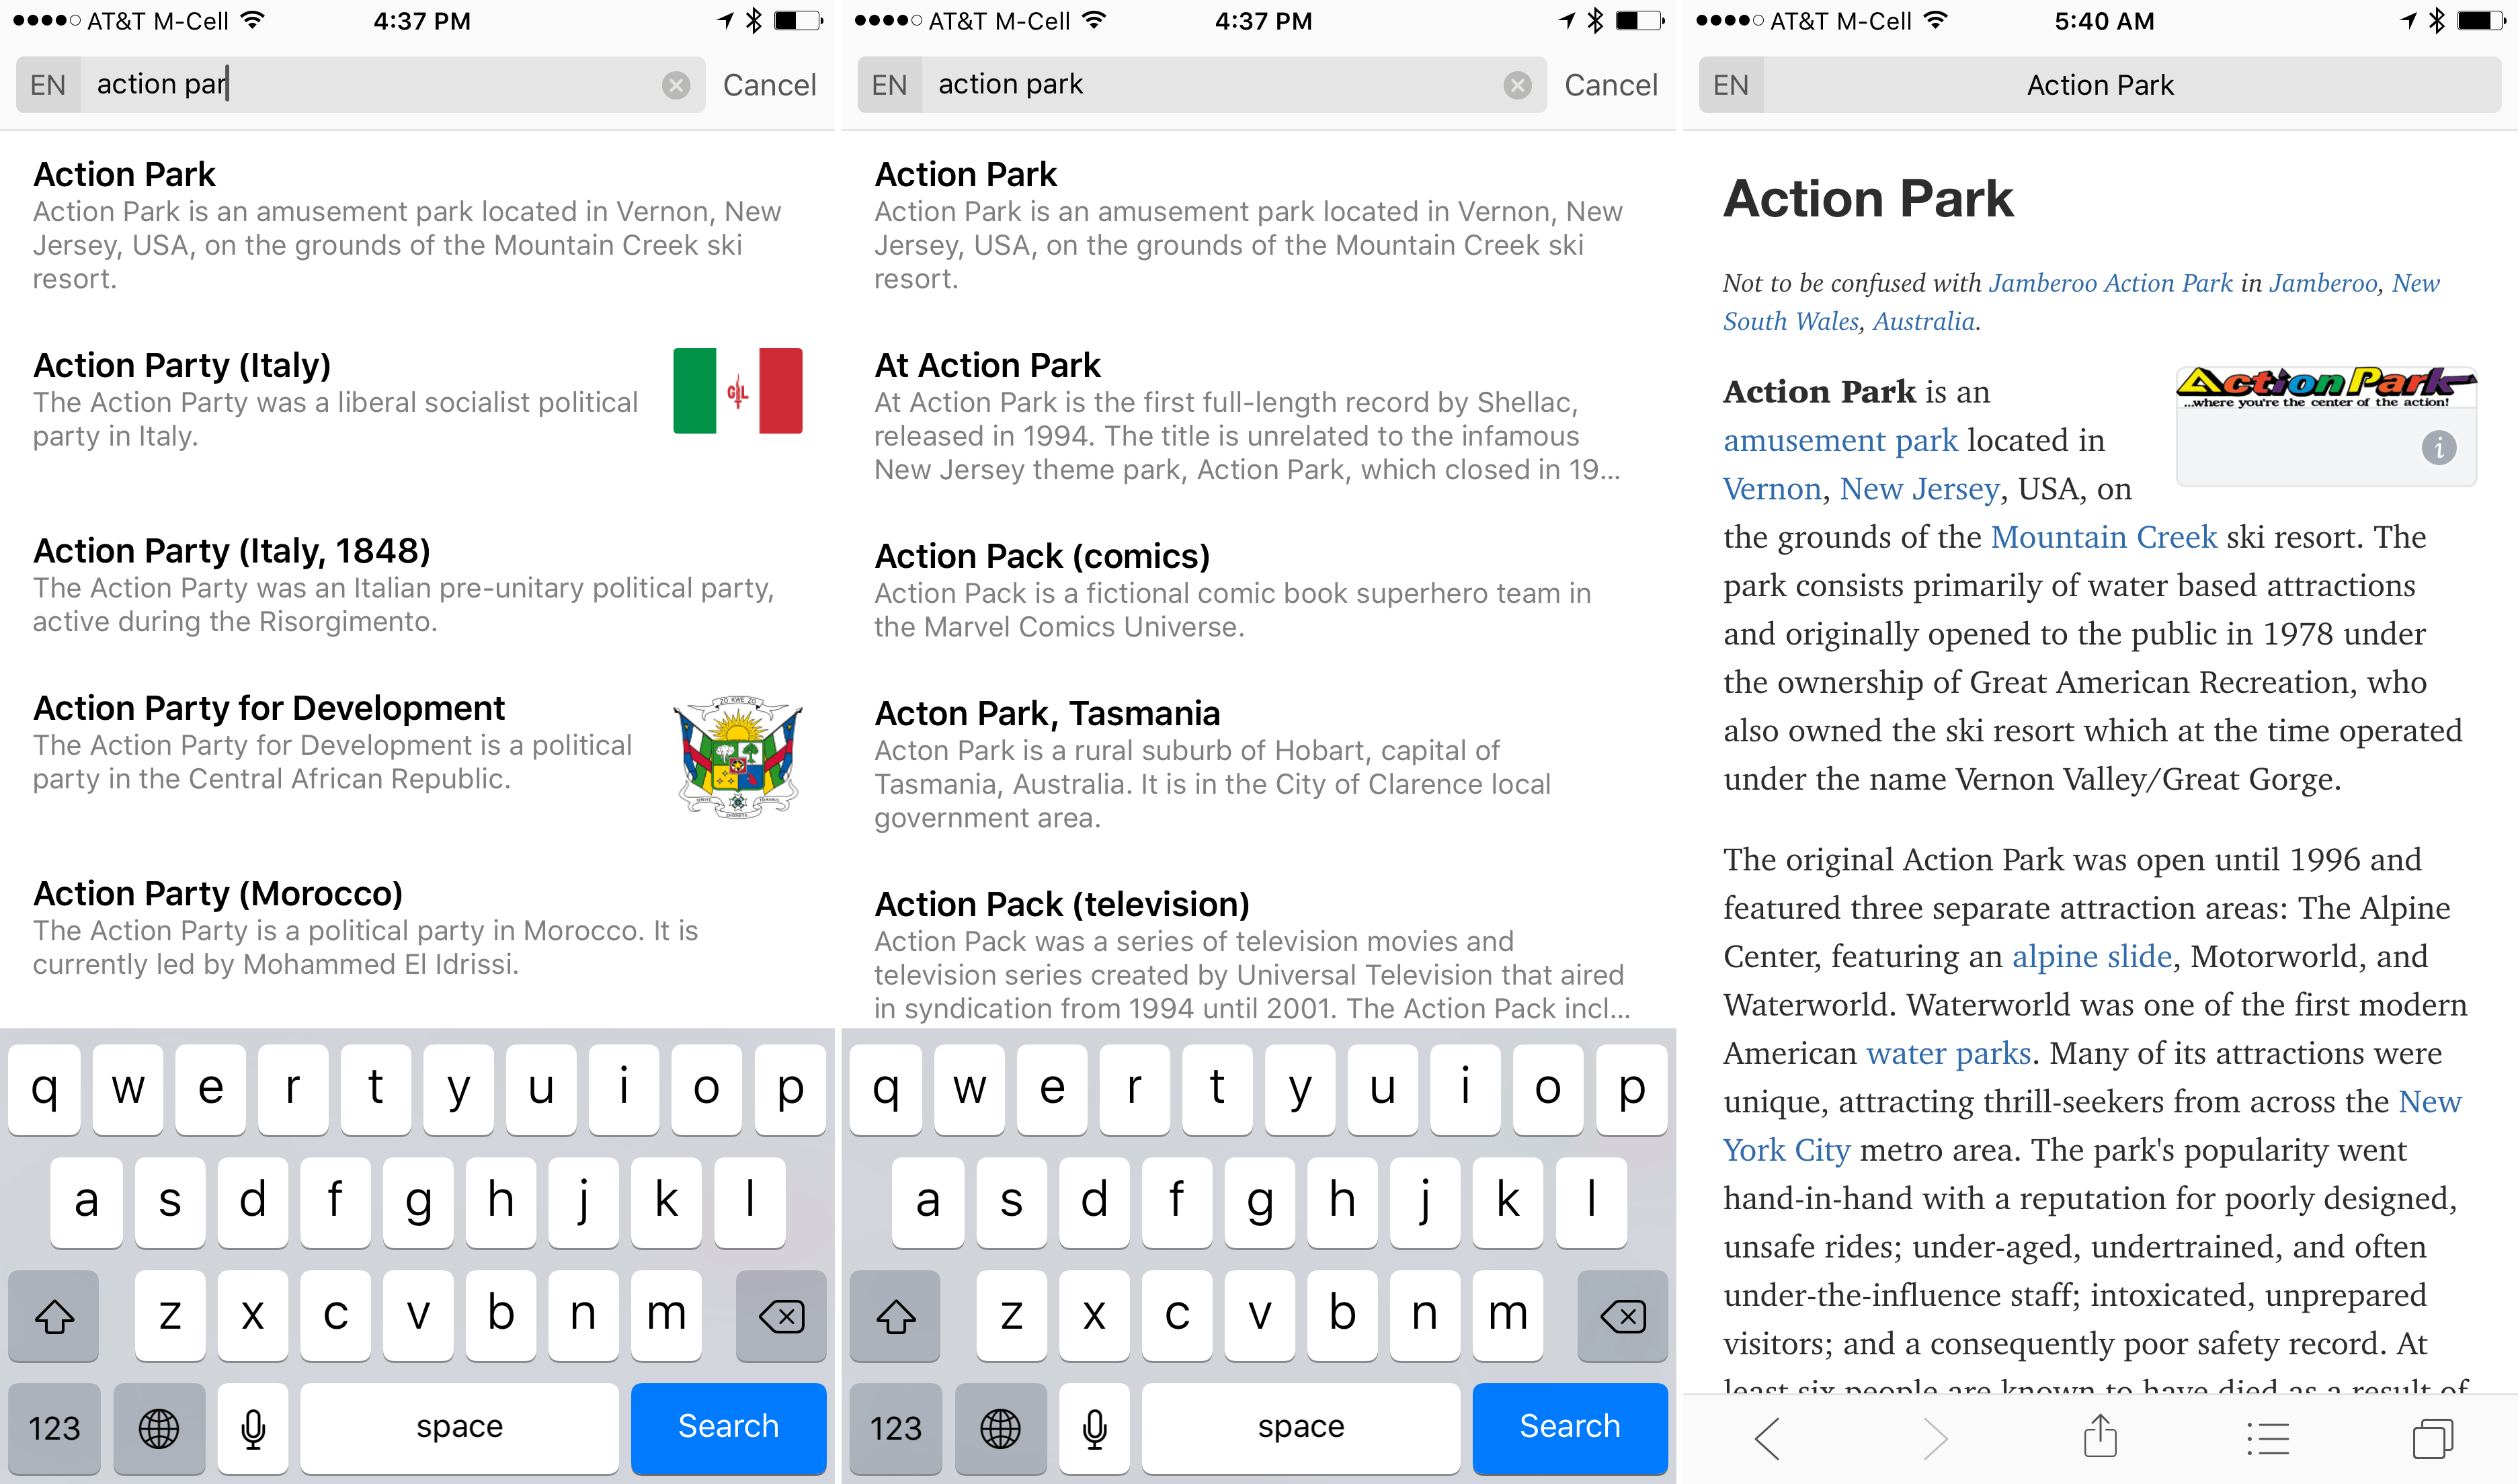 Wonder updates your search as you type.